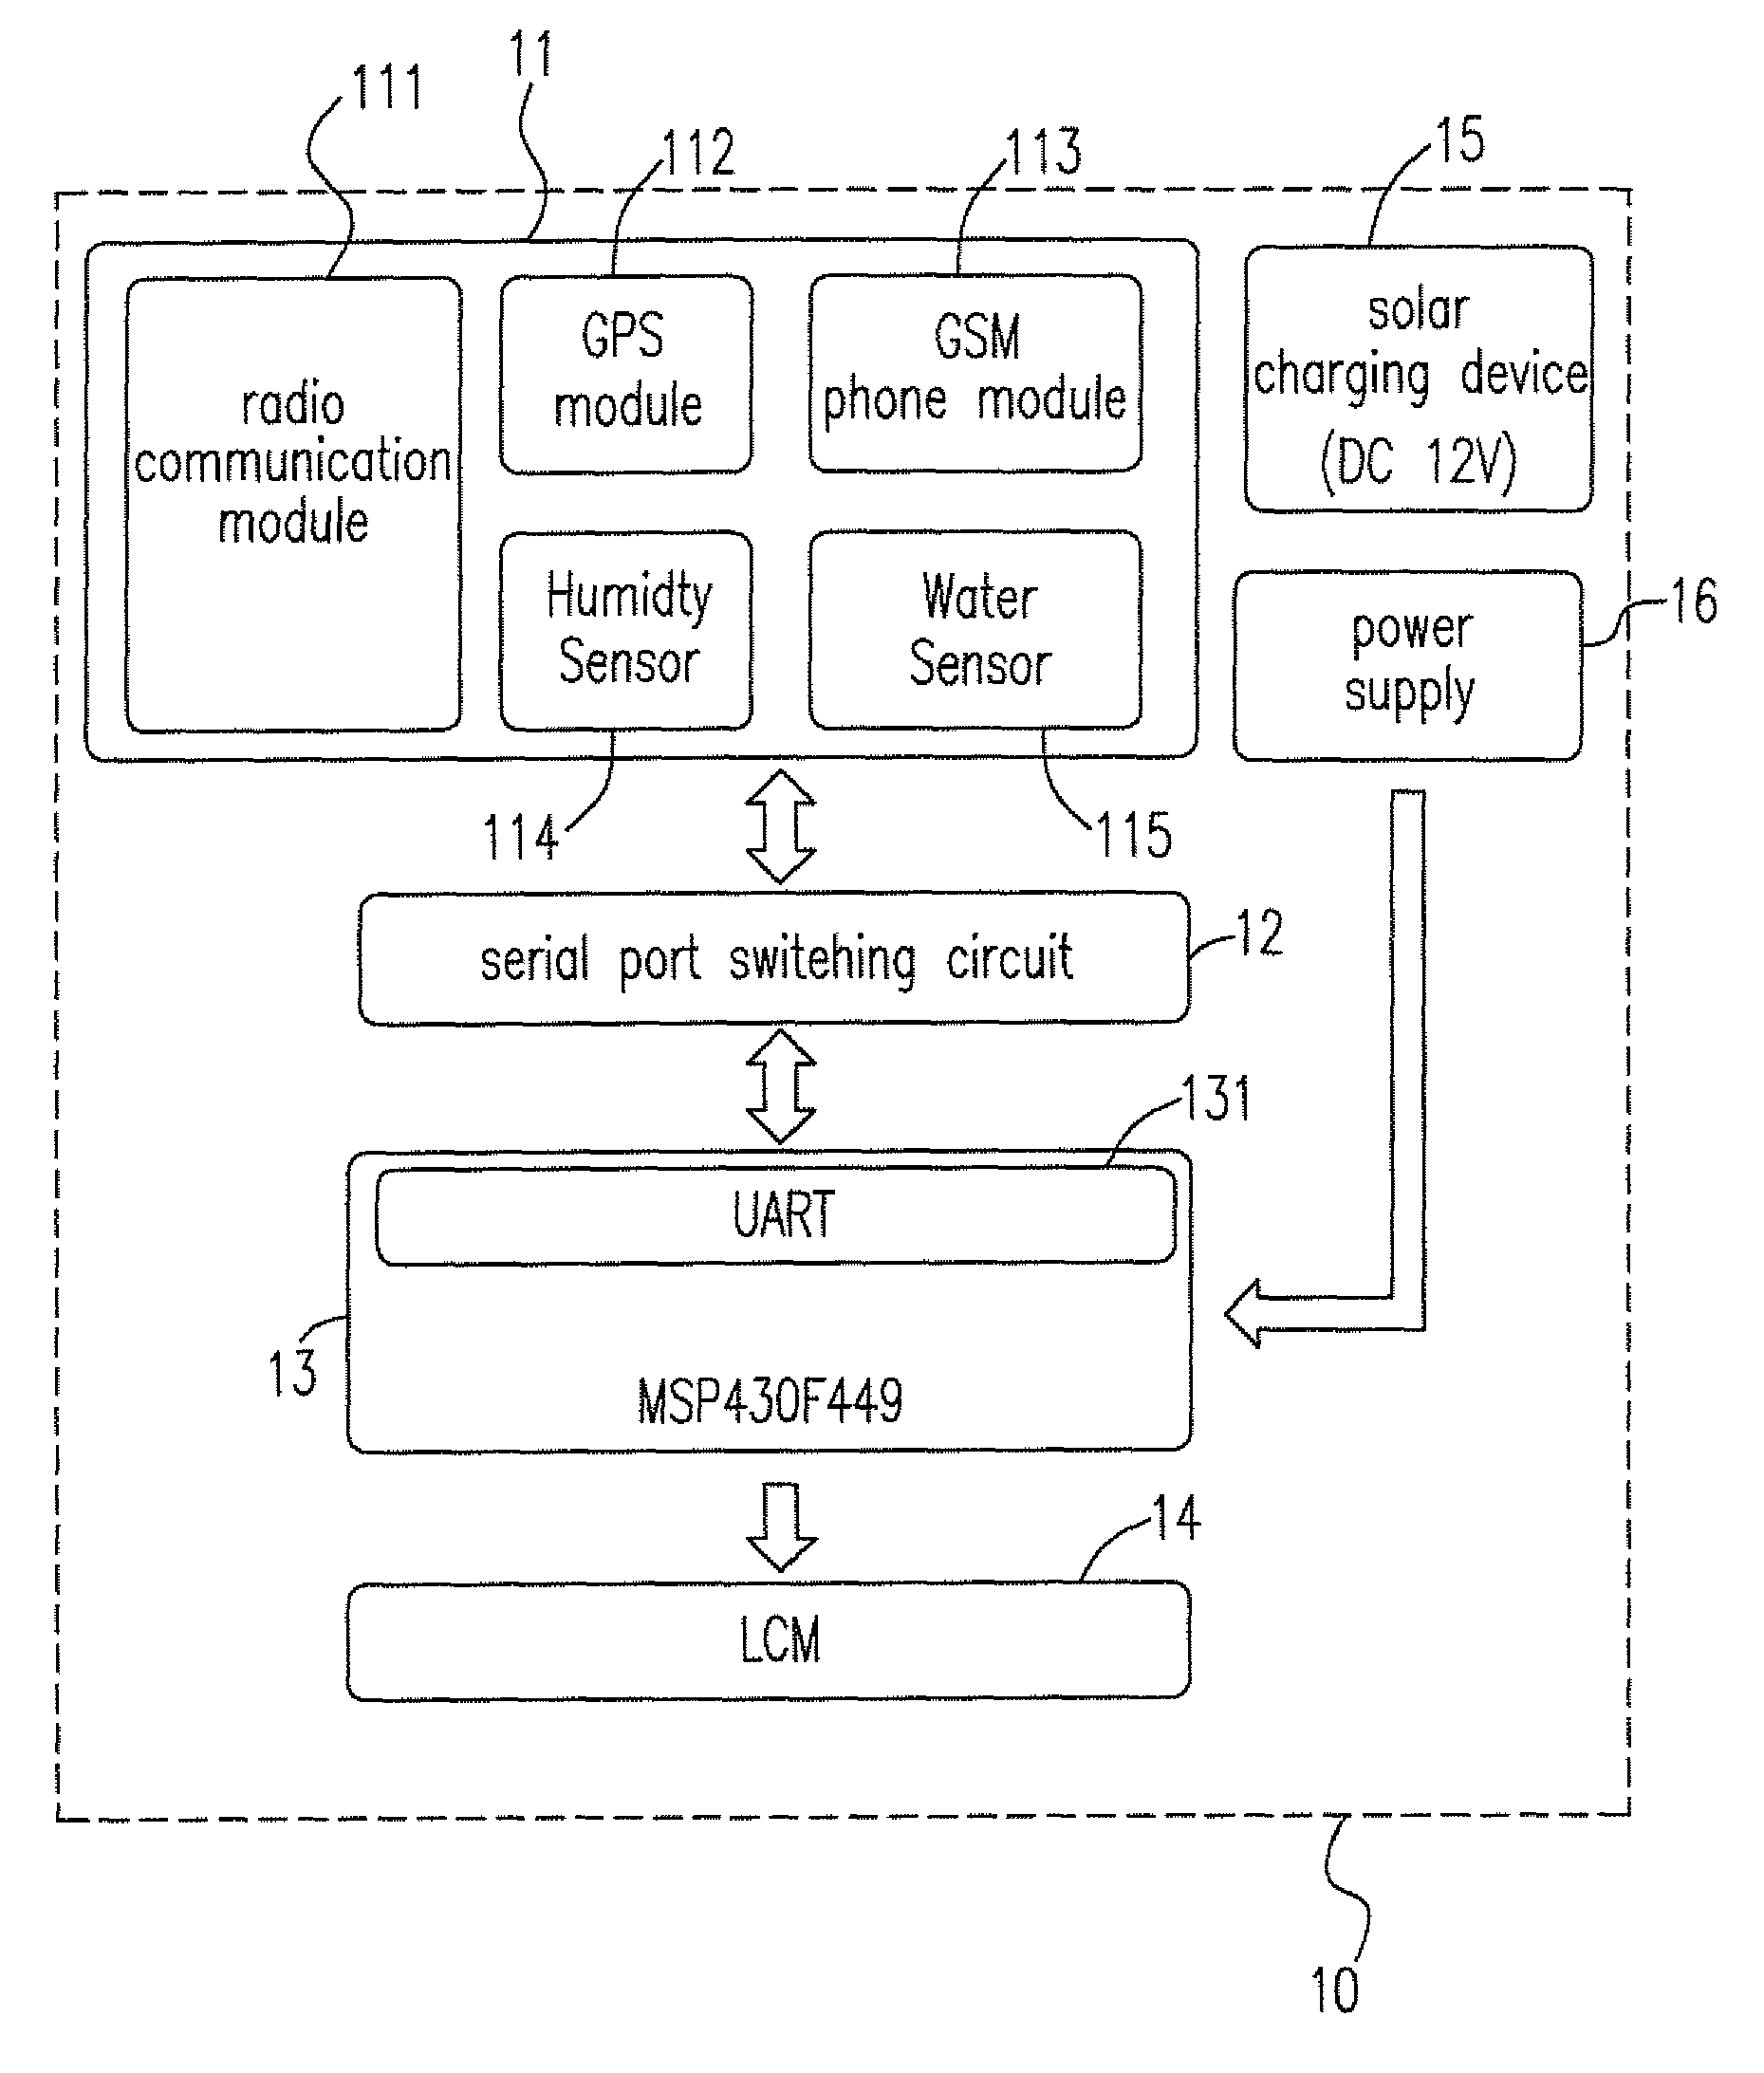 Automated remote water quality monitoring system with wireless communication capabilities and the method thereof